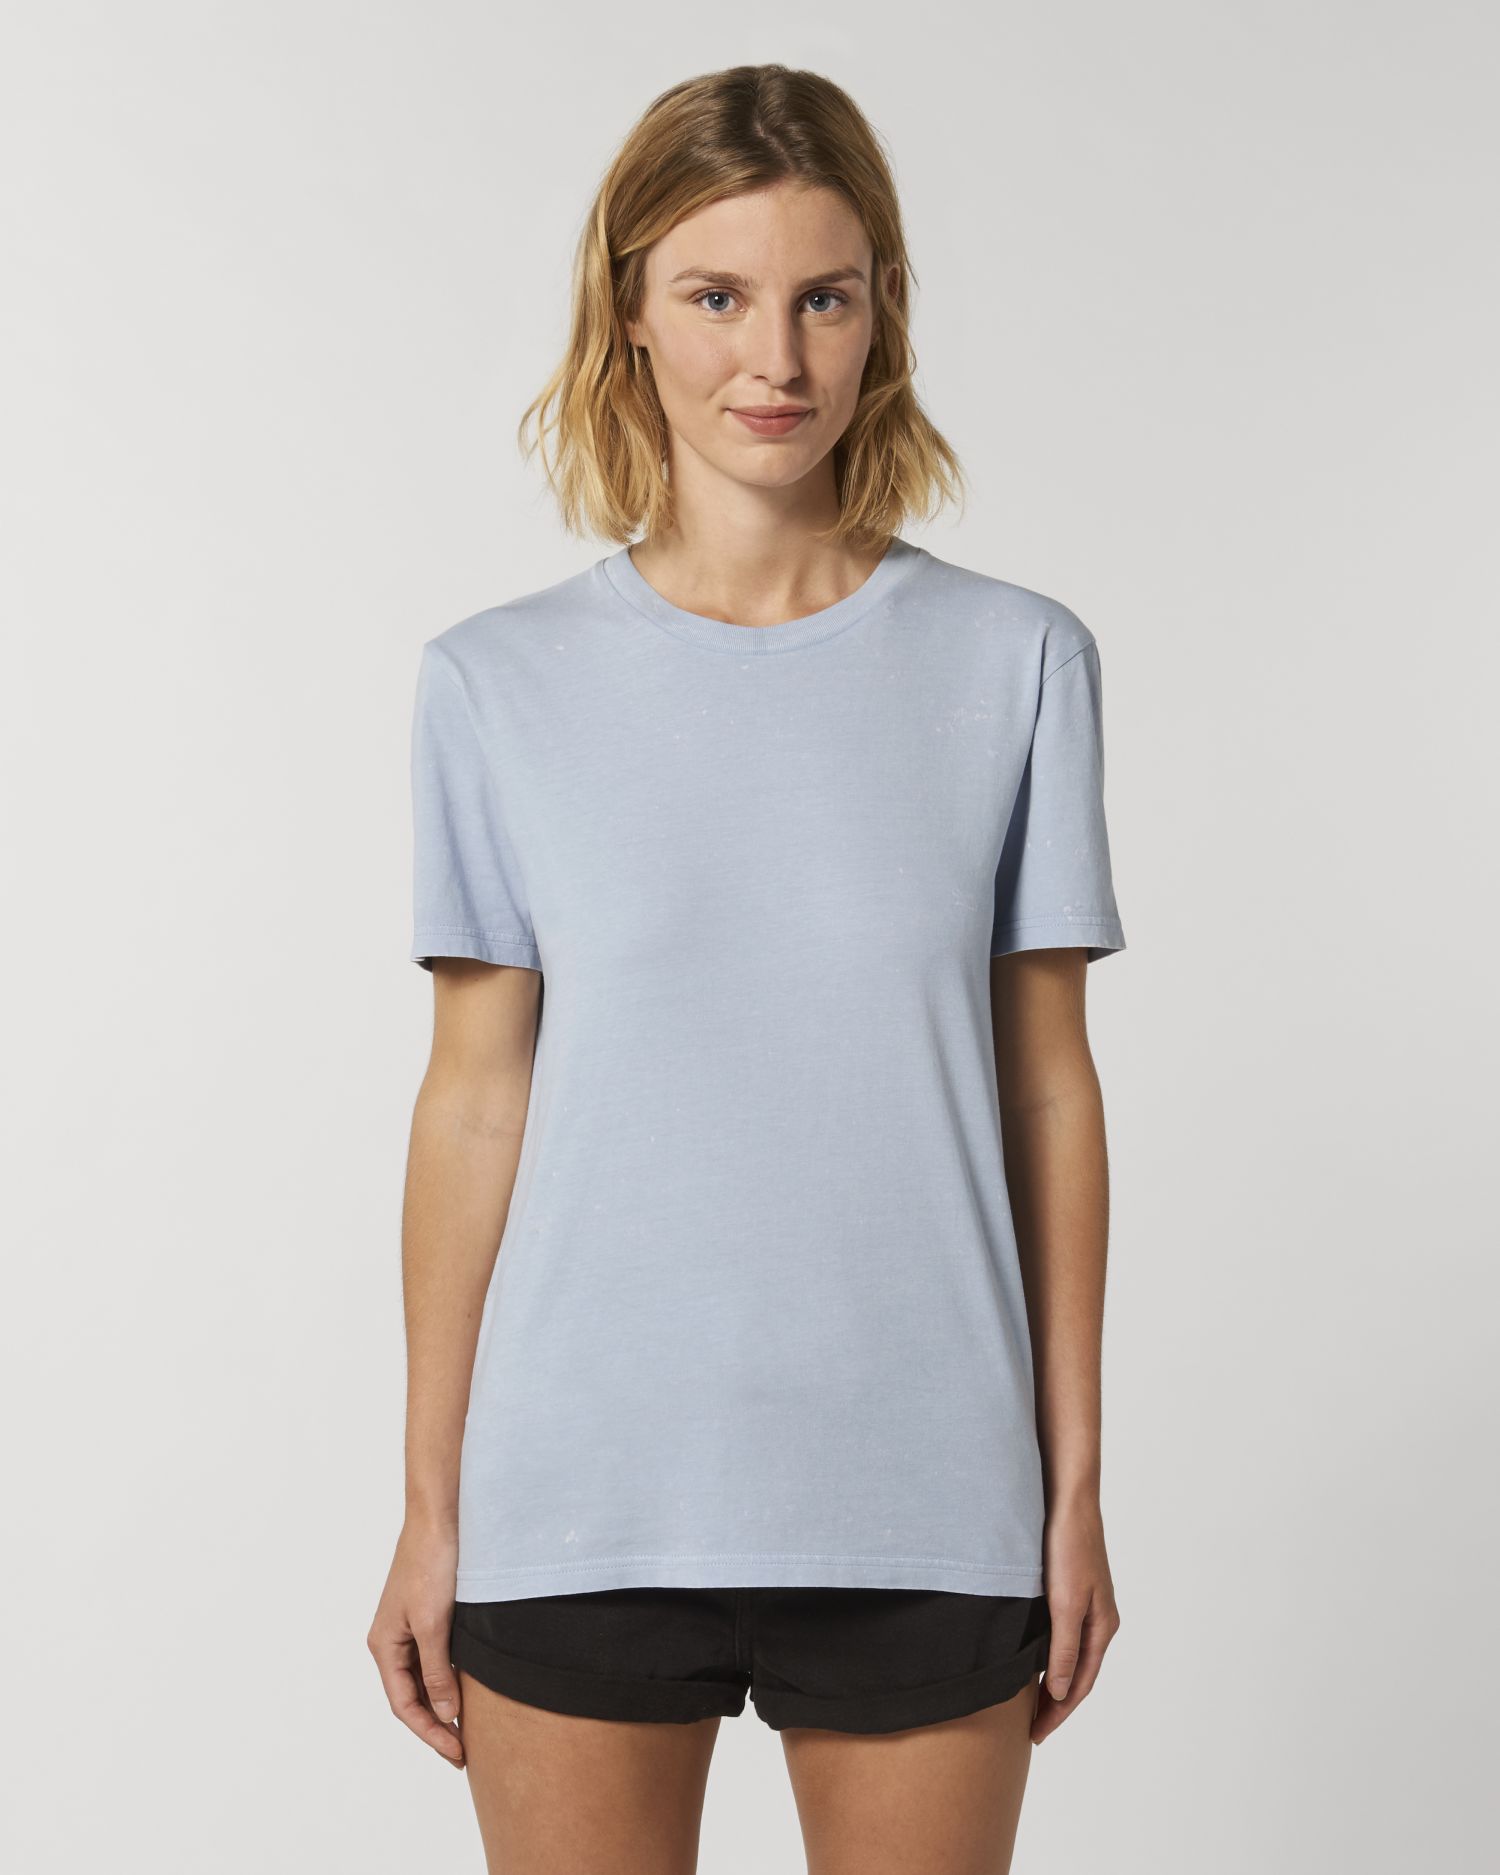 T-Shirt Creator Vintage in Farbe G. Dyed Aged Serene Blue